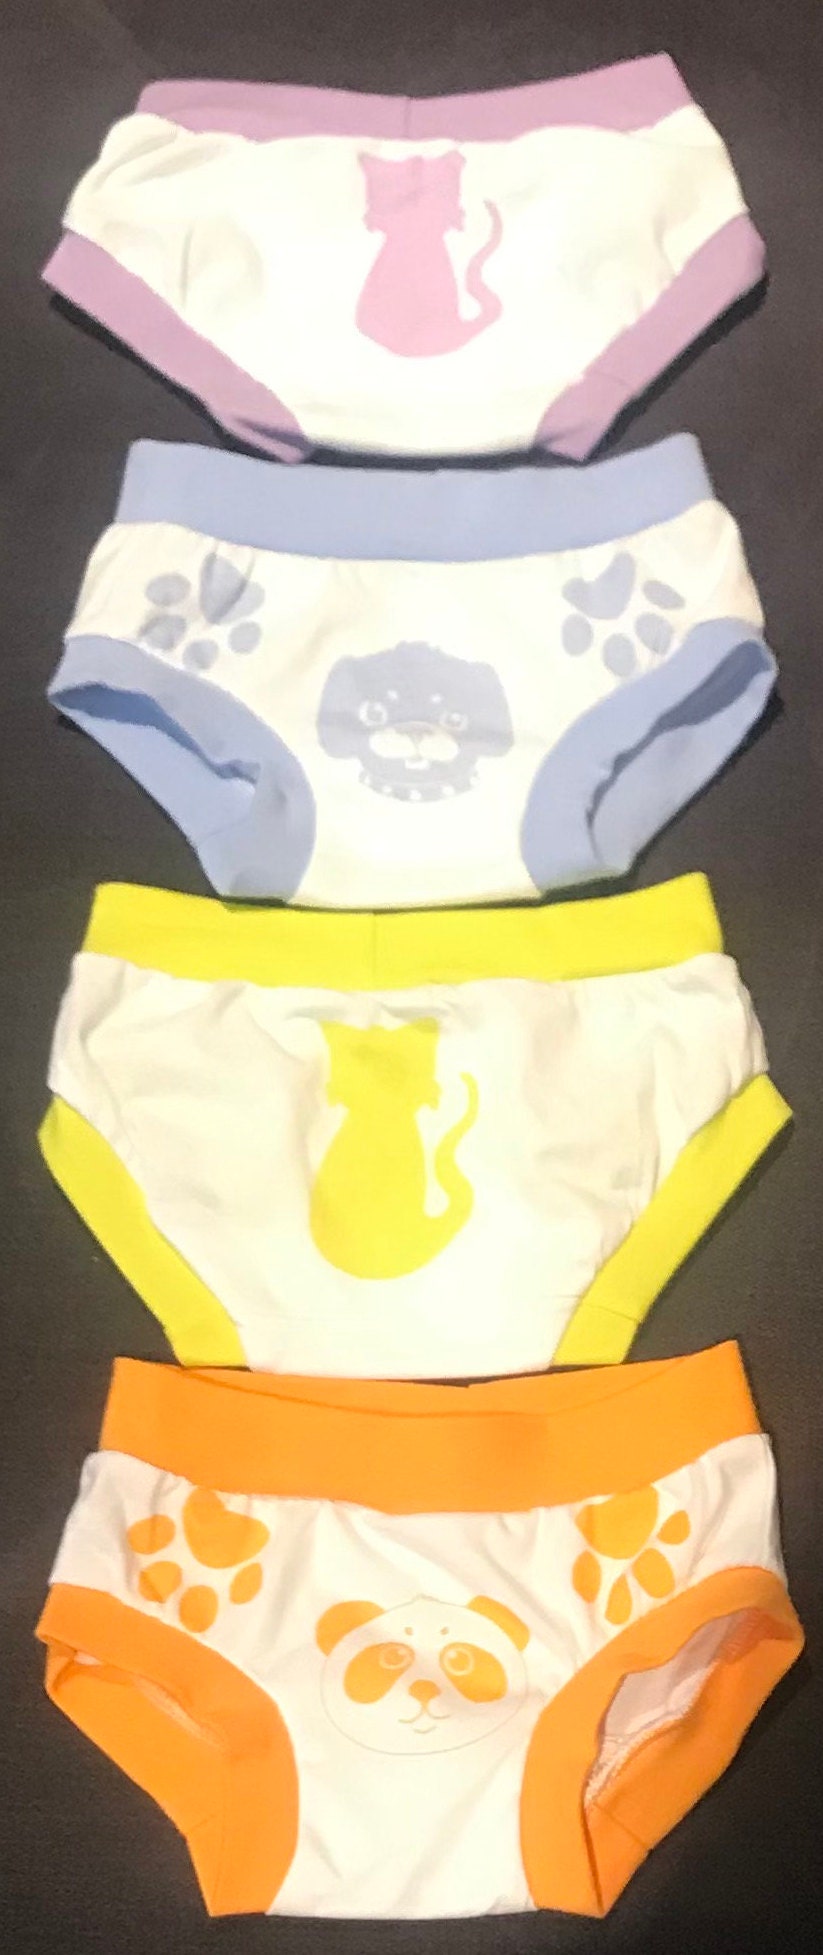 Gender Neutral/ Brief Style Underwear/ Dog Print Potty Training Underwear  With Paws to Show How to Dress Correctly. -  Canada